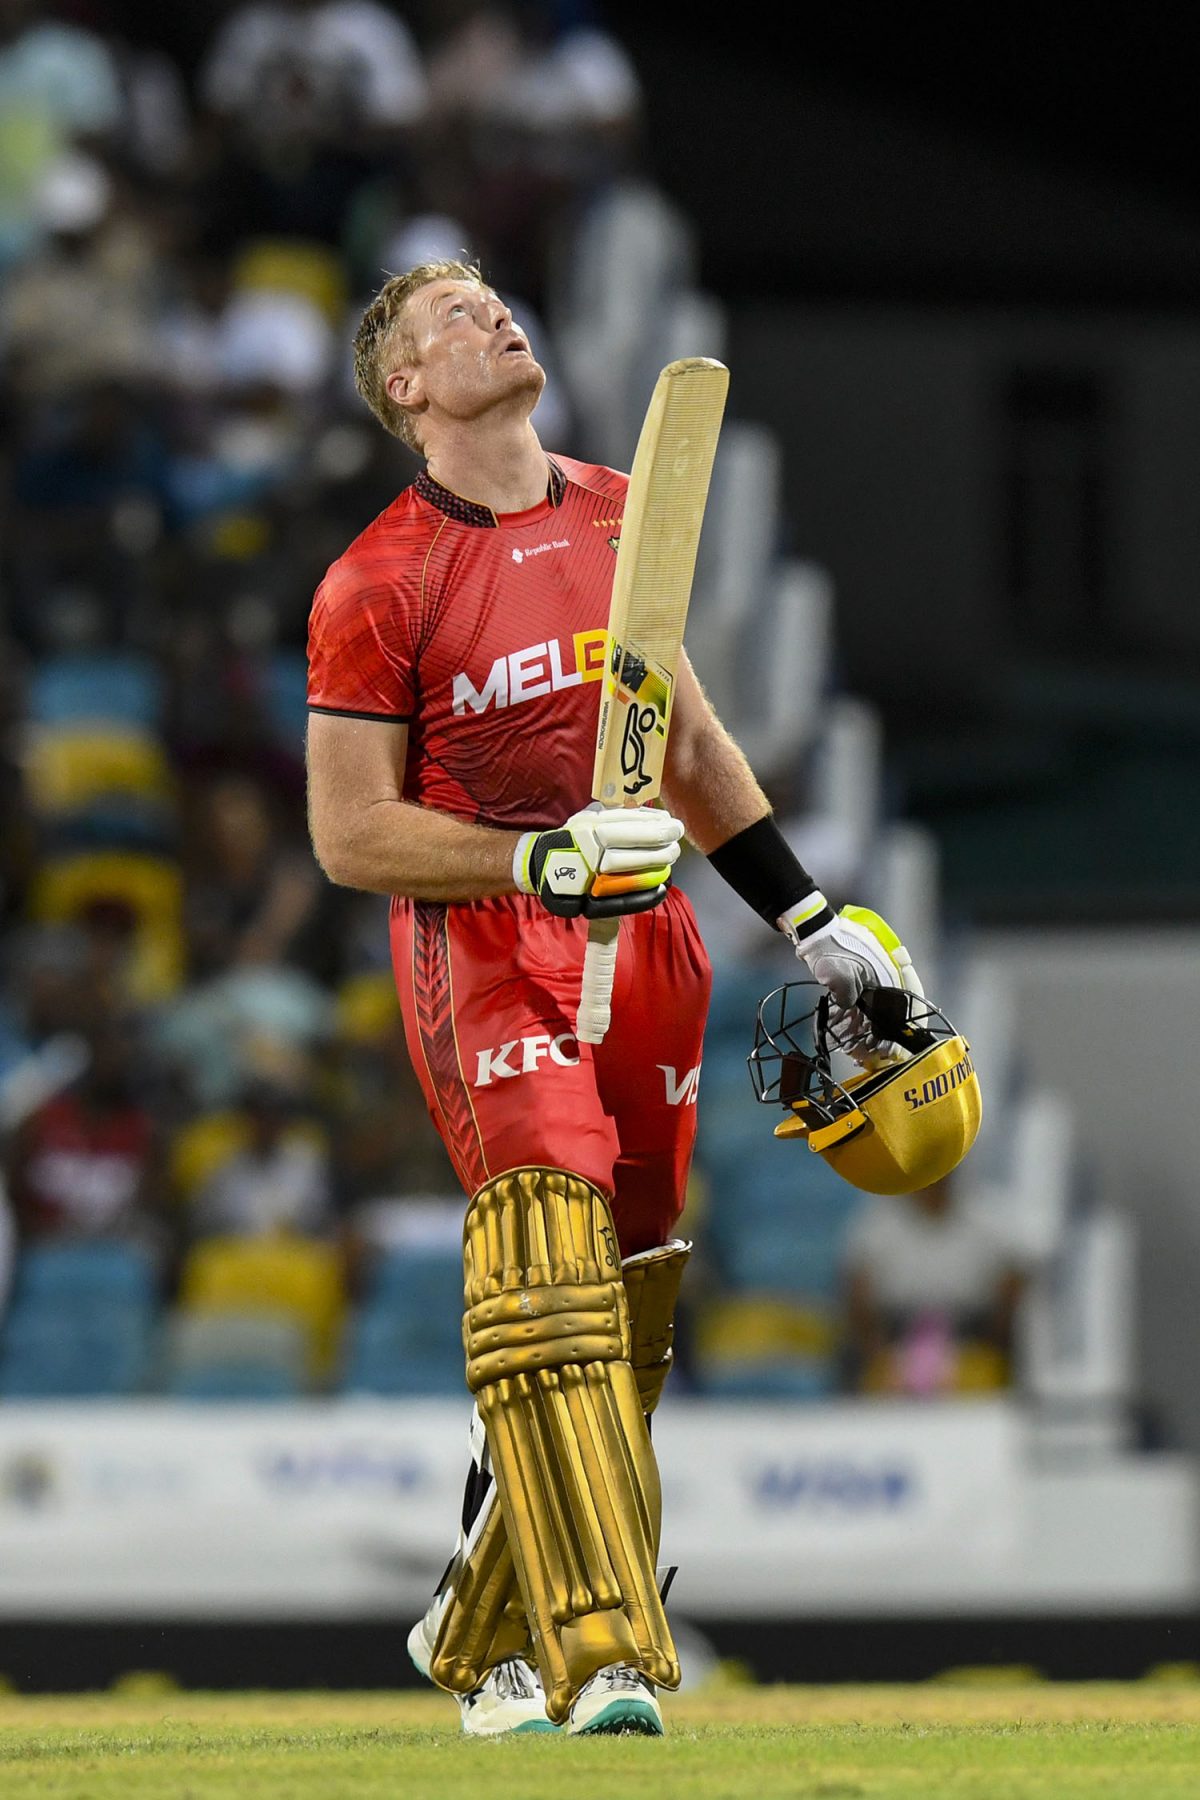 Martin Guptill of Trinbago Knight Riders celebrates his century during the Men’s 2023 Republic Bank Caribbean Premier League match 13 between Barbados Royals and Trinbago Knight Riders at Kensington Oval yesterday in Bridgetown, Barbados. (Photo by Randy Brooks/CPL T20 via Getty Images)